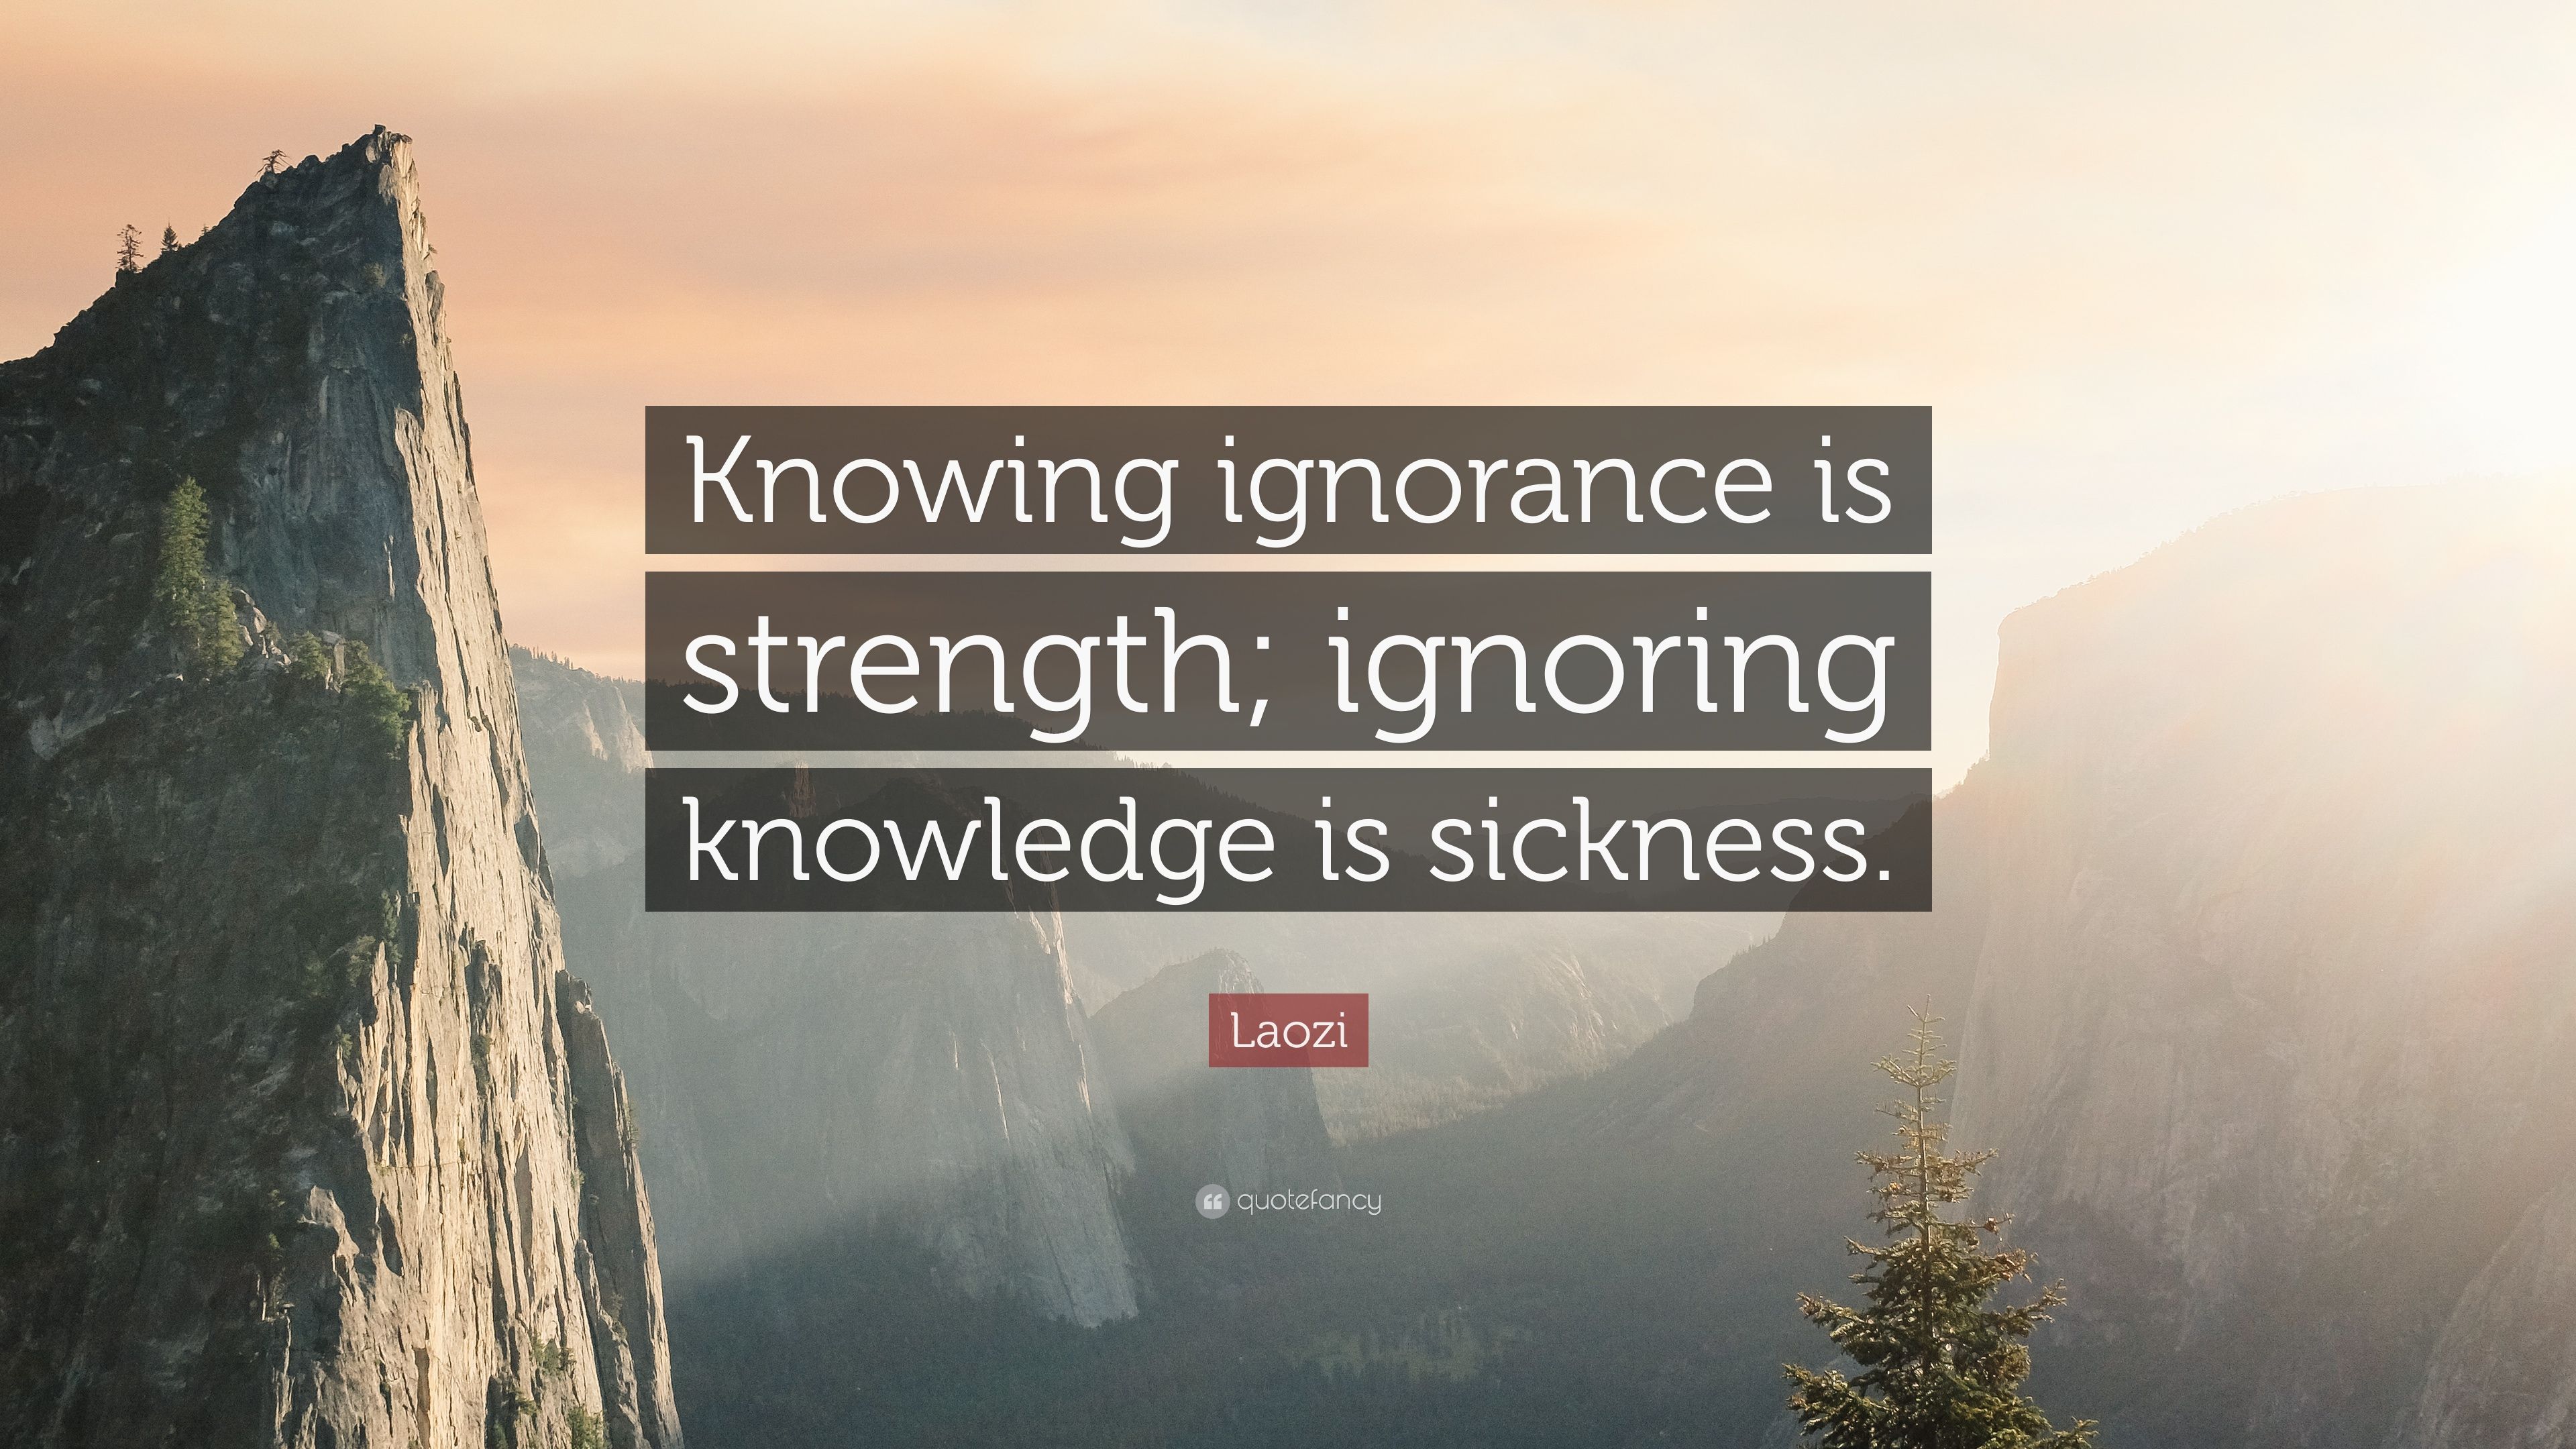 Laozi Quote: “Knowing ignorance is strength; ignoring knowledge is sickness.” (12 wallpaper)